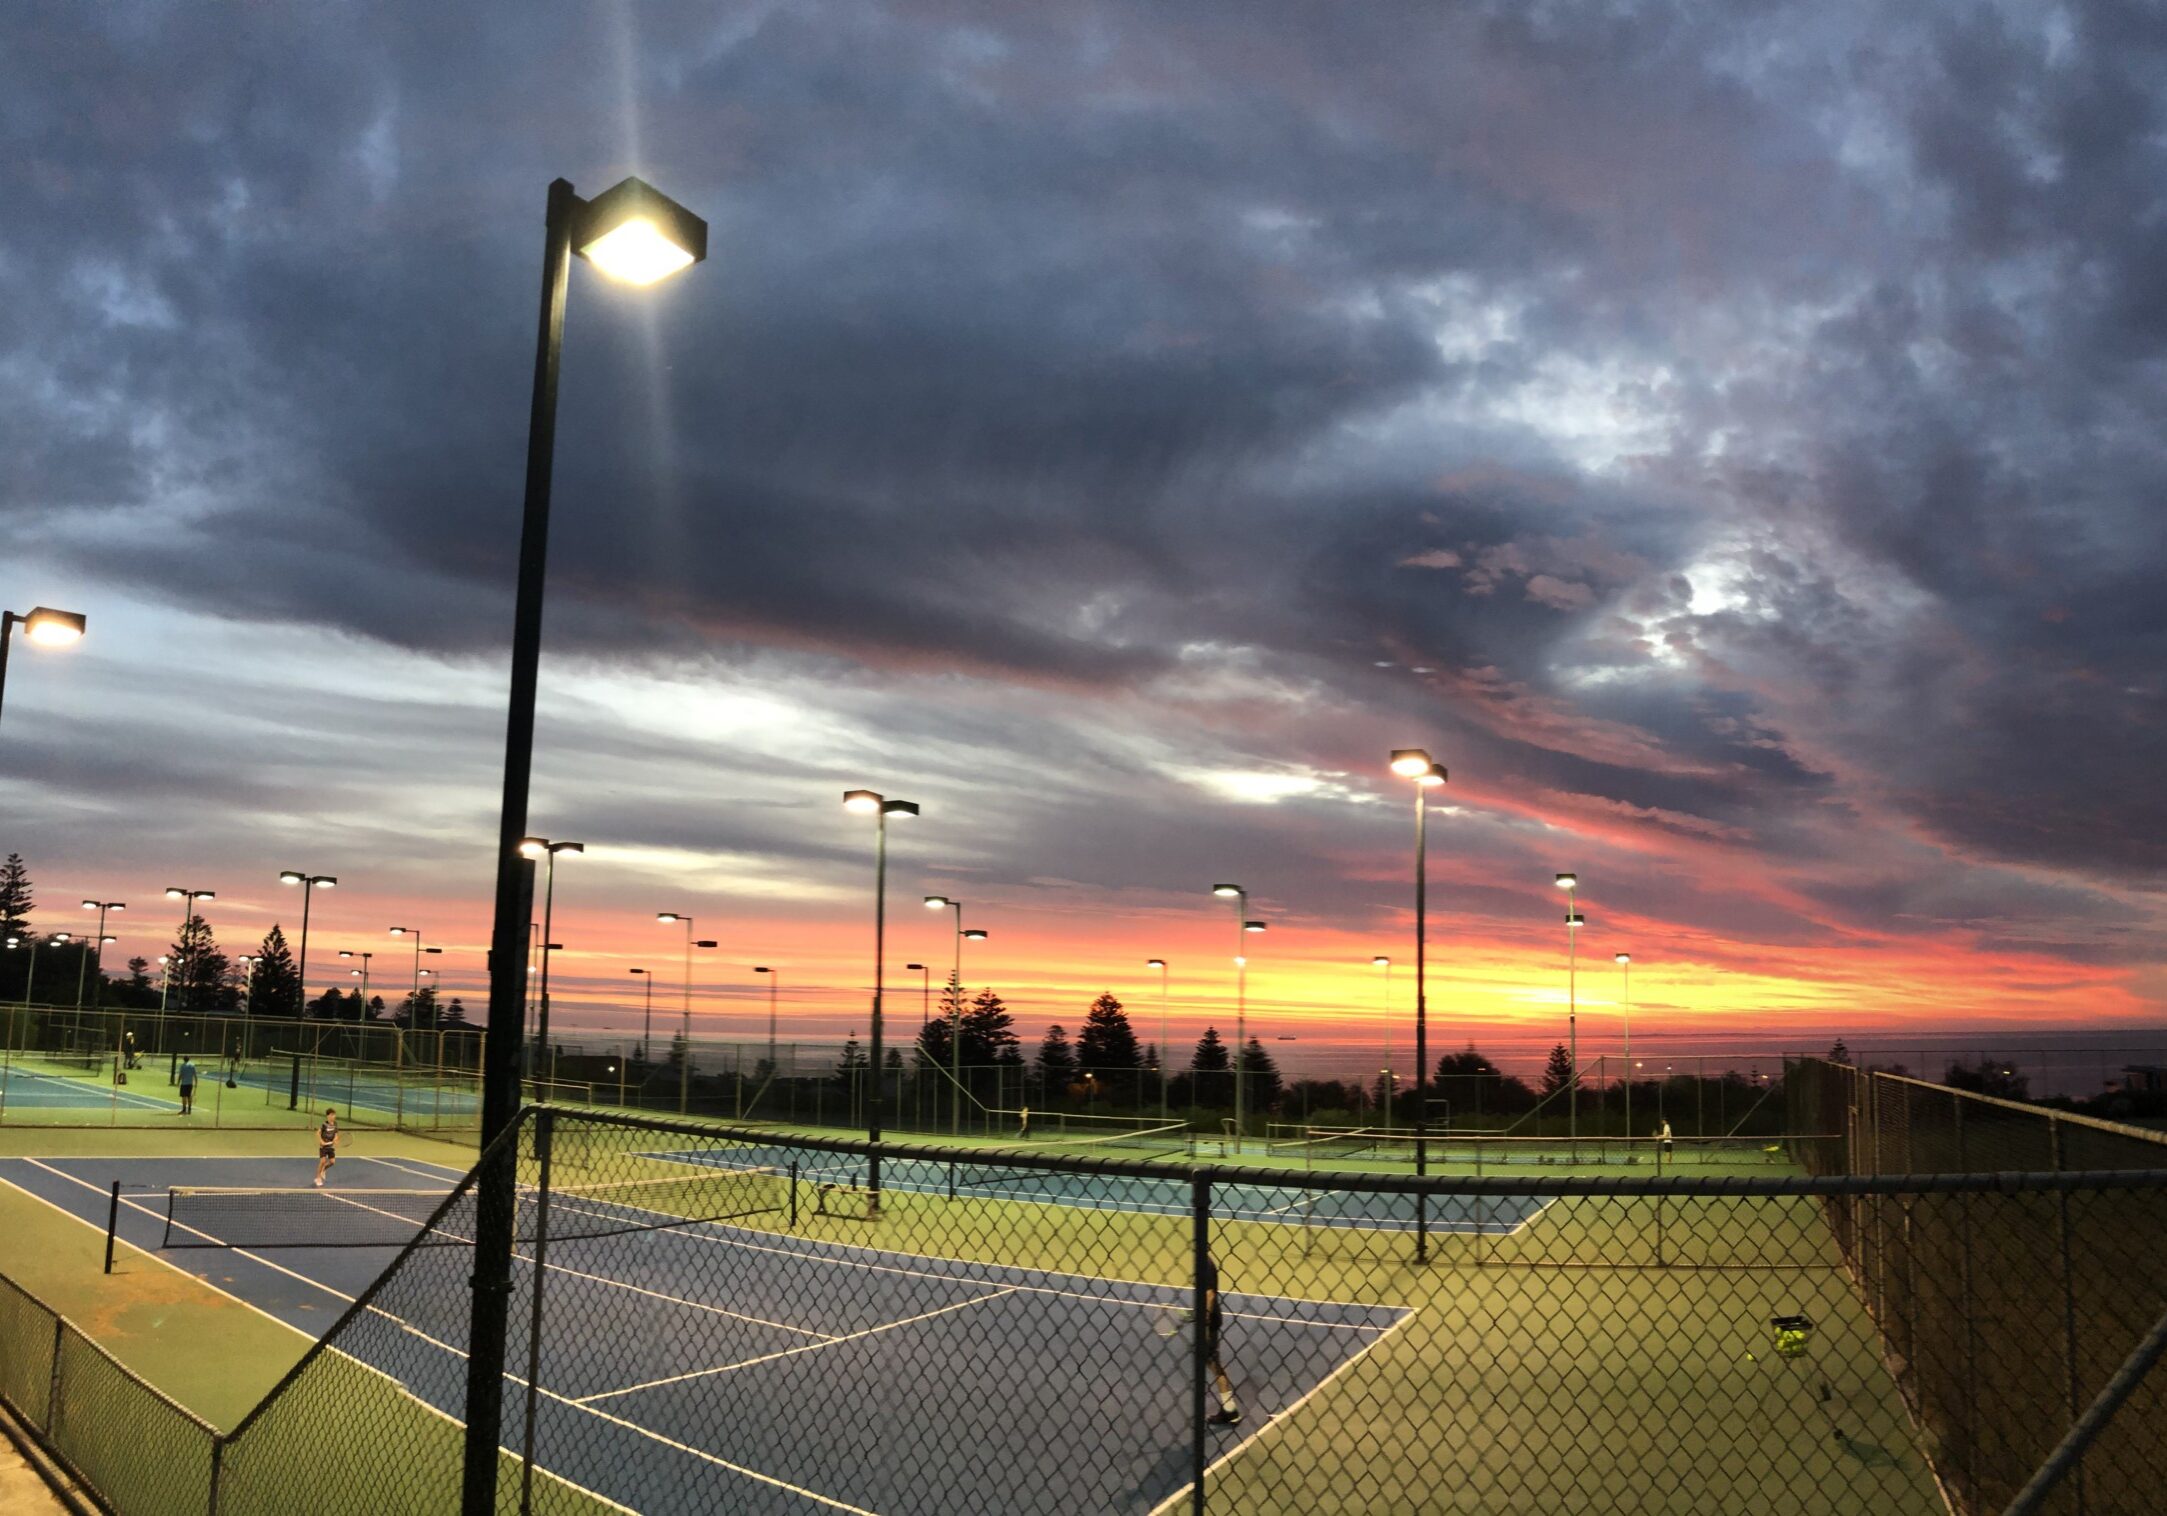 View of hard courts with sunset in the background